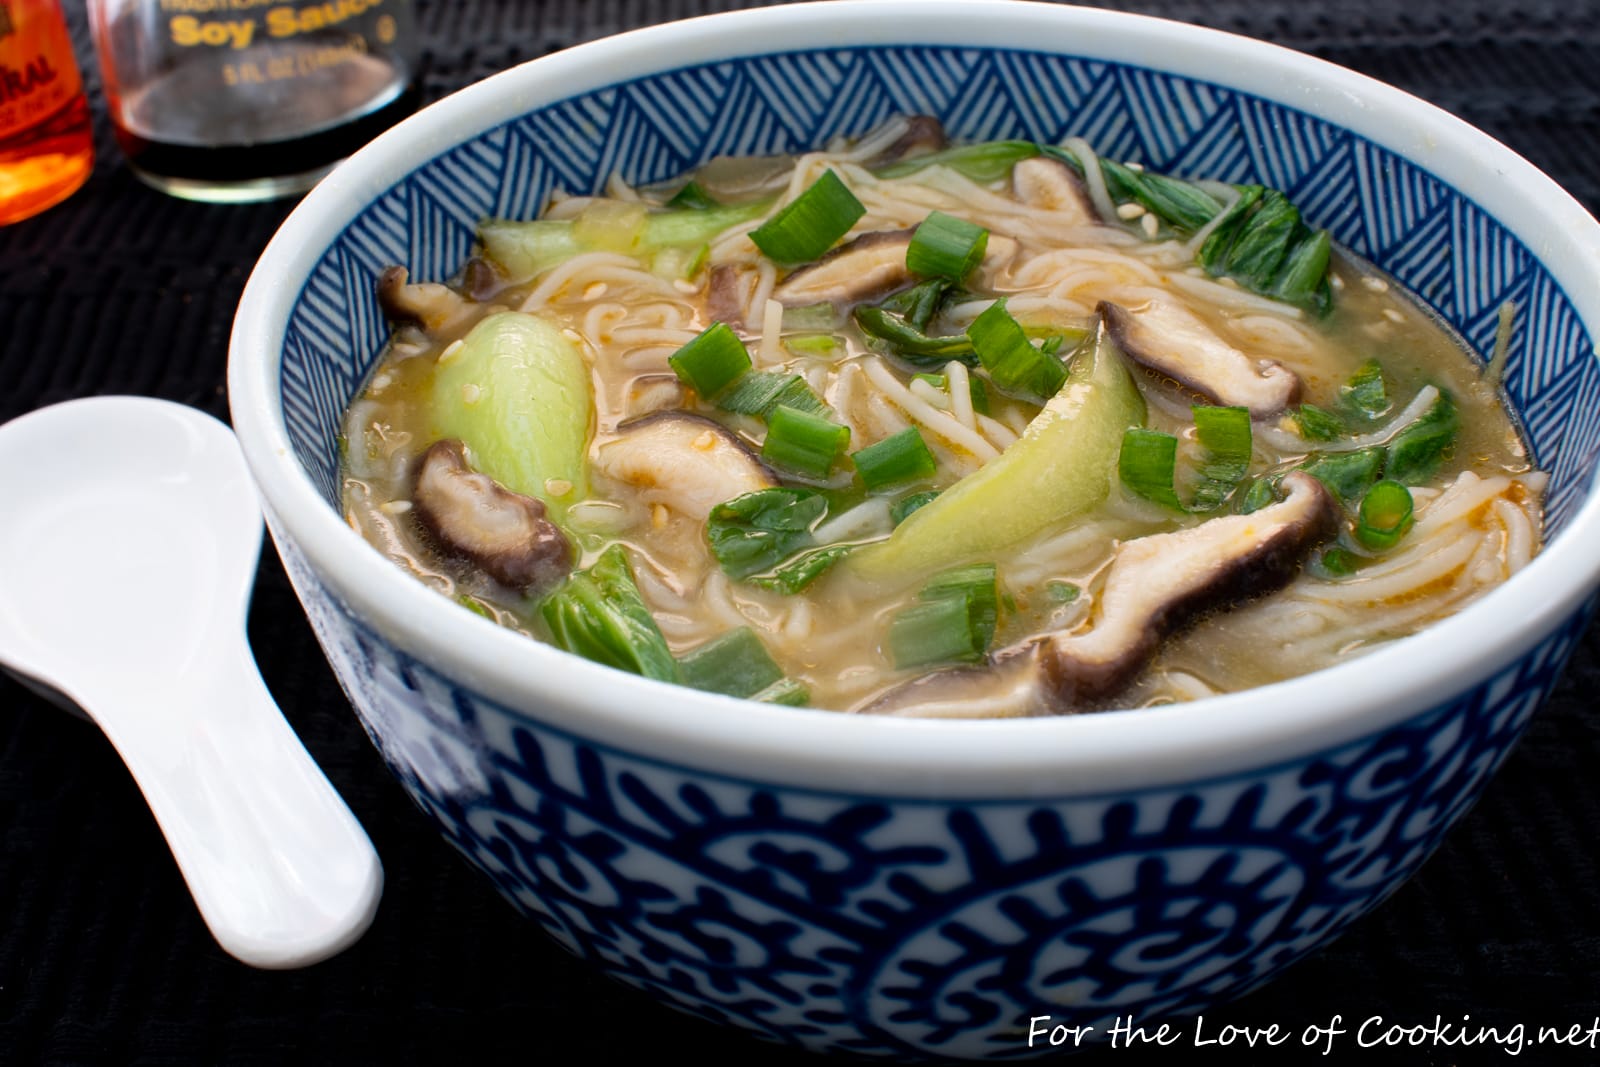 https://fortheloveofcooking-net.exactdn.com/wp-content/uploads/2019/06/Ginger-Garlic-Noodle-Soup-with-Bok-Choy-and-Shiitake-Mushrooms-7729-1.jpg?strip=all&lossy=1&quality=90&ssl=1